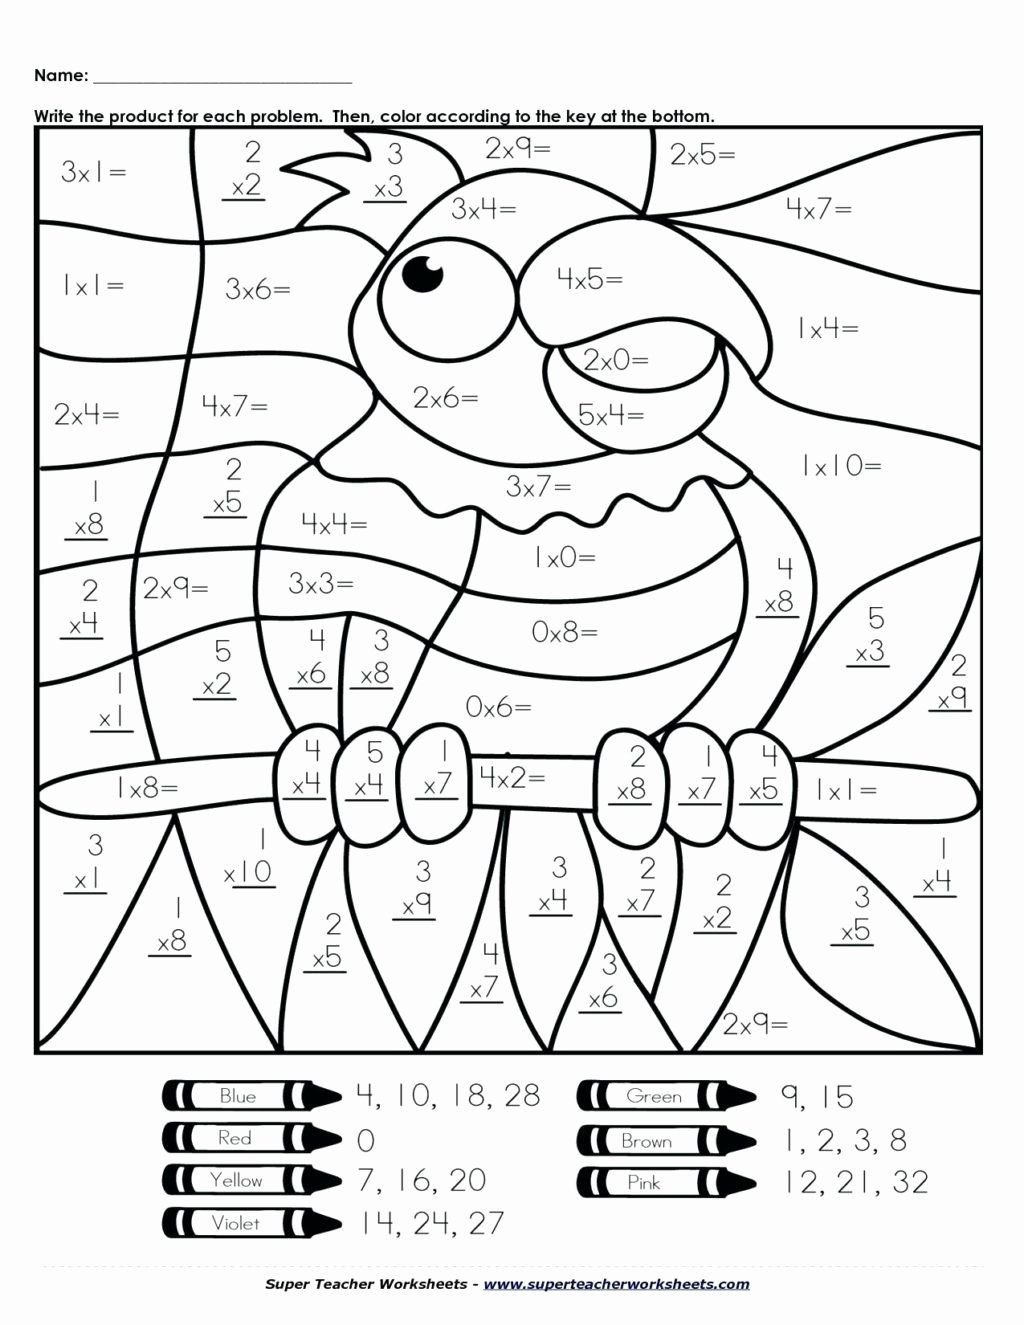 Coloring Worksheets for 2nd Grade Turkey Math Coloring Sheet In 2020